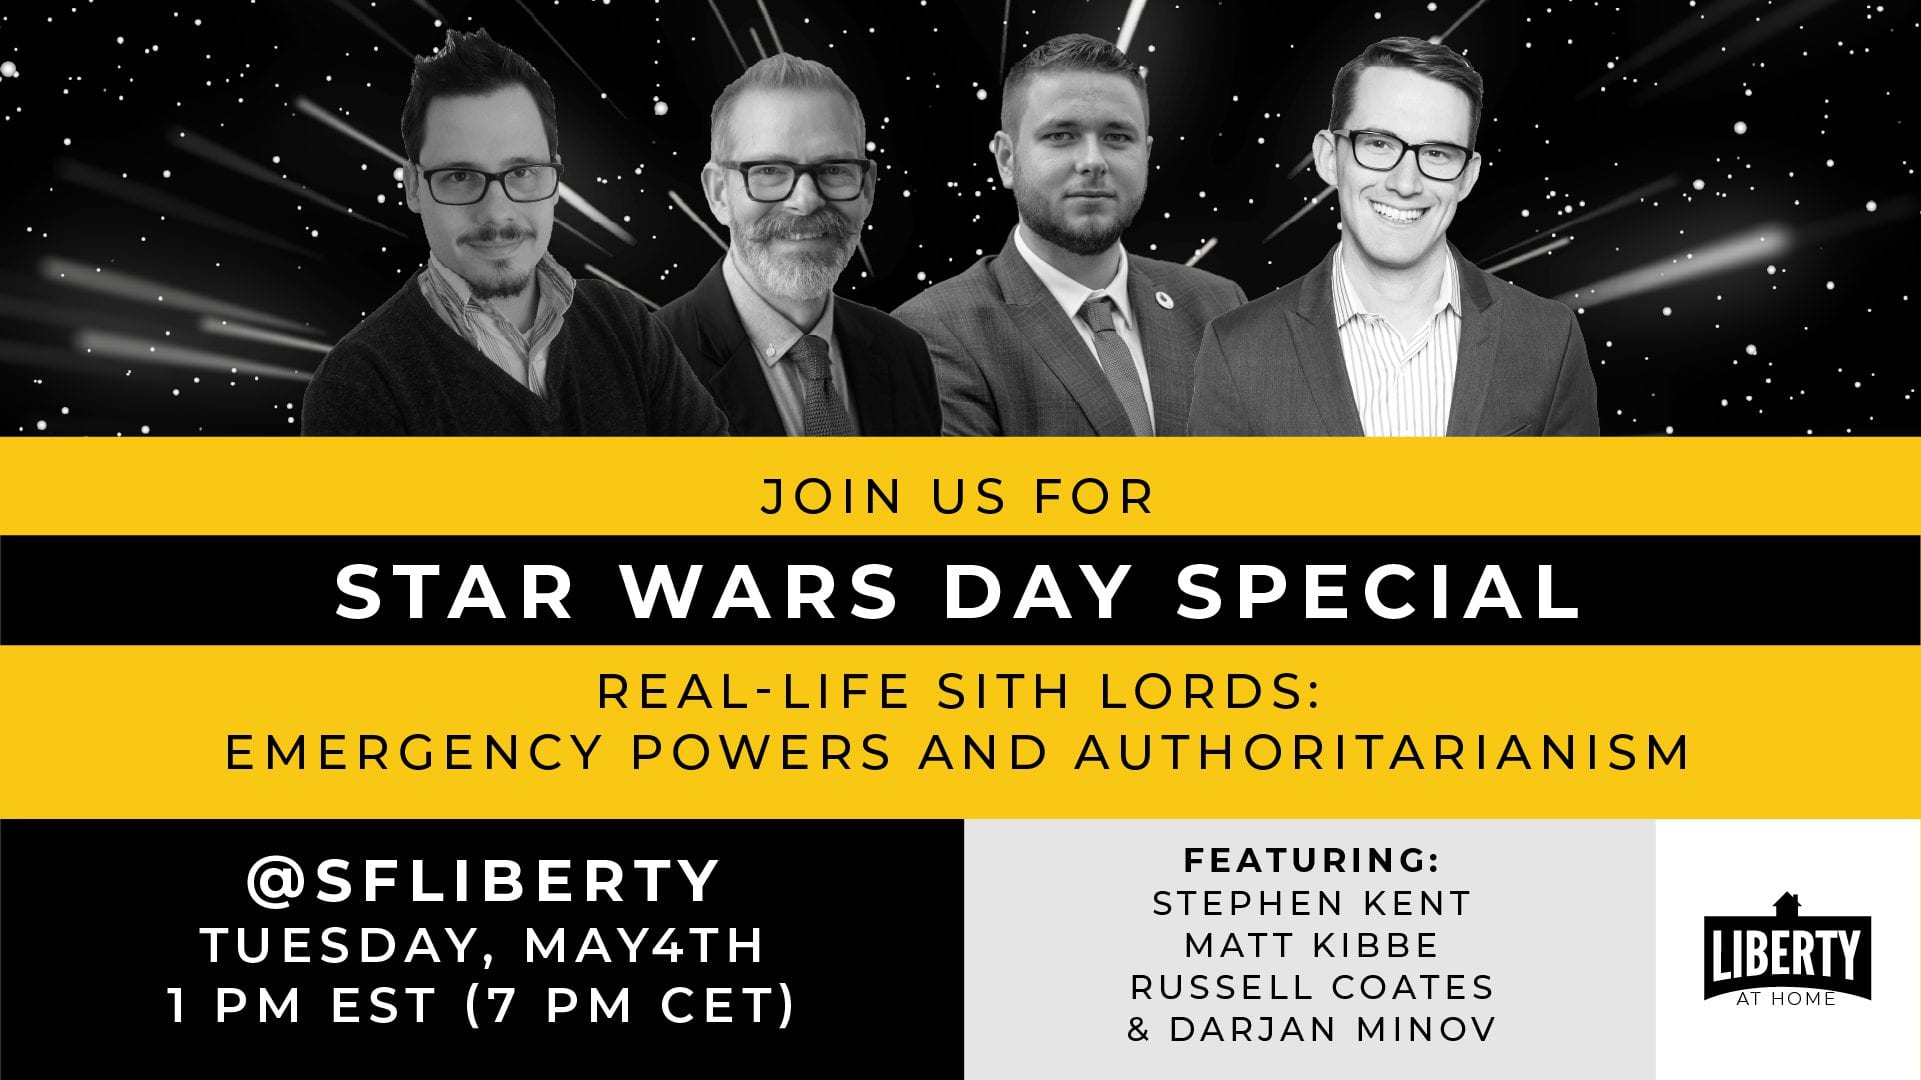 Students For Liberty invites you to join us on Instagram Live for a Star Wars Day special event on Tuesday, May 4, 2021, at 1PM EST.